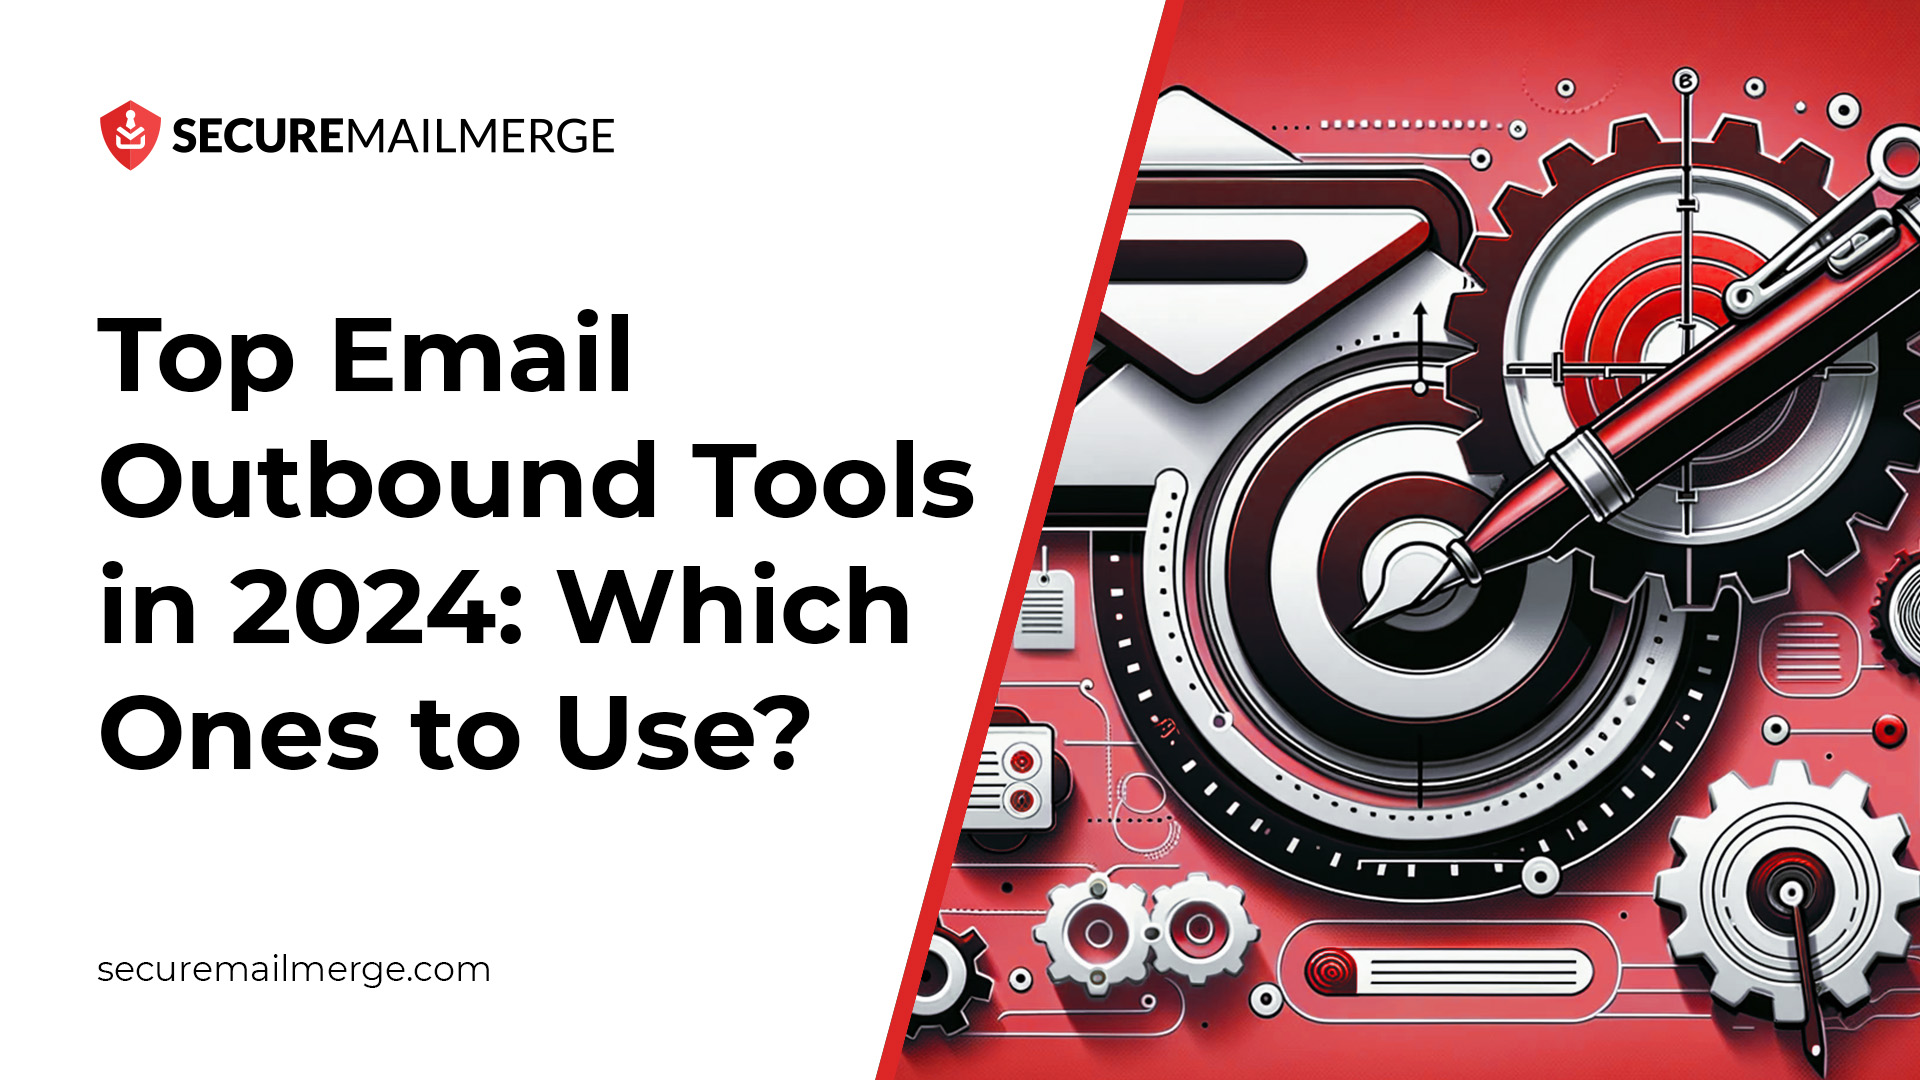 Top Email Outbound Tools in 2024: Which Ones to Use?